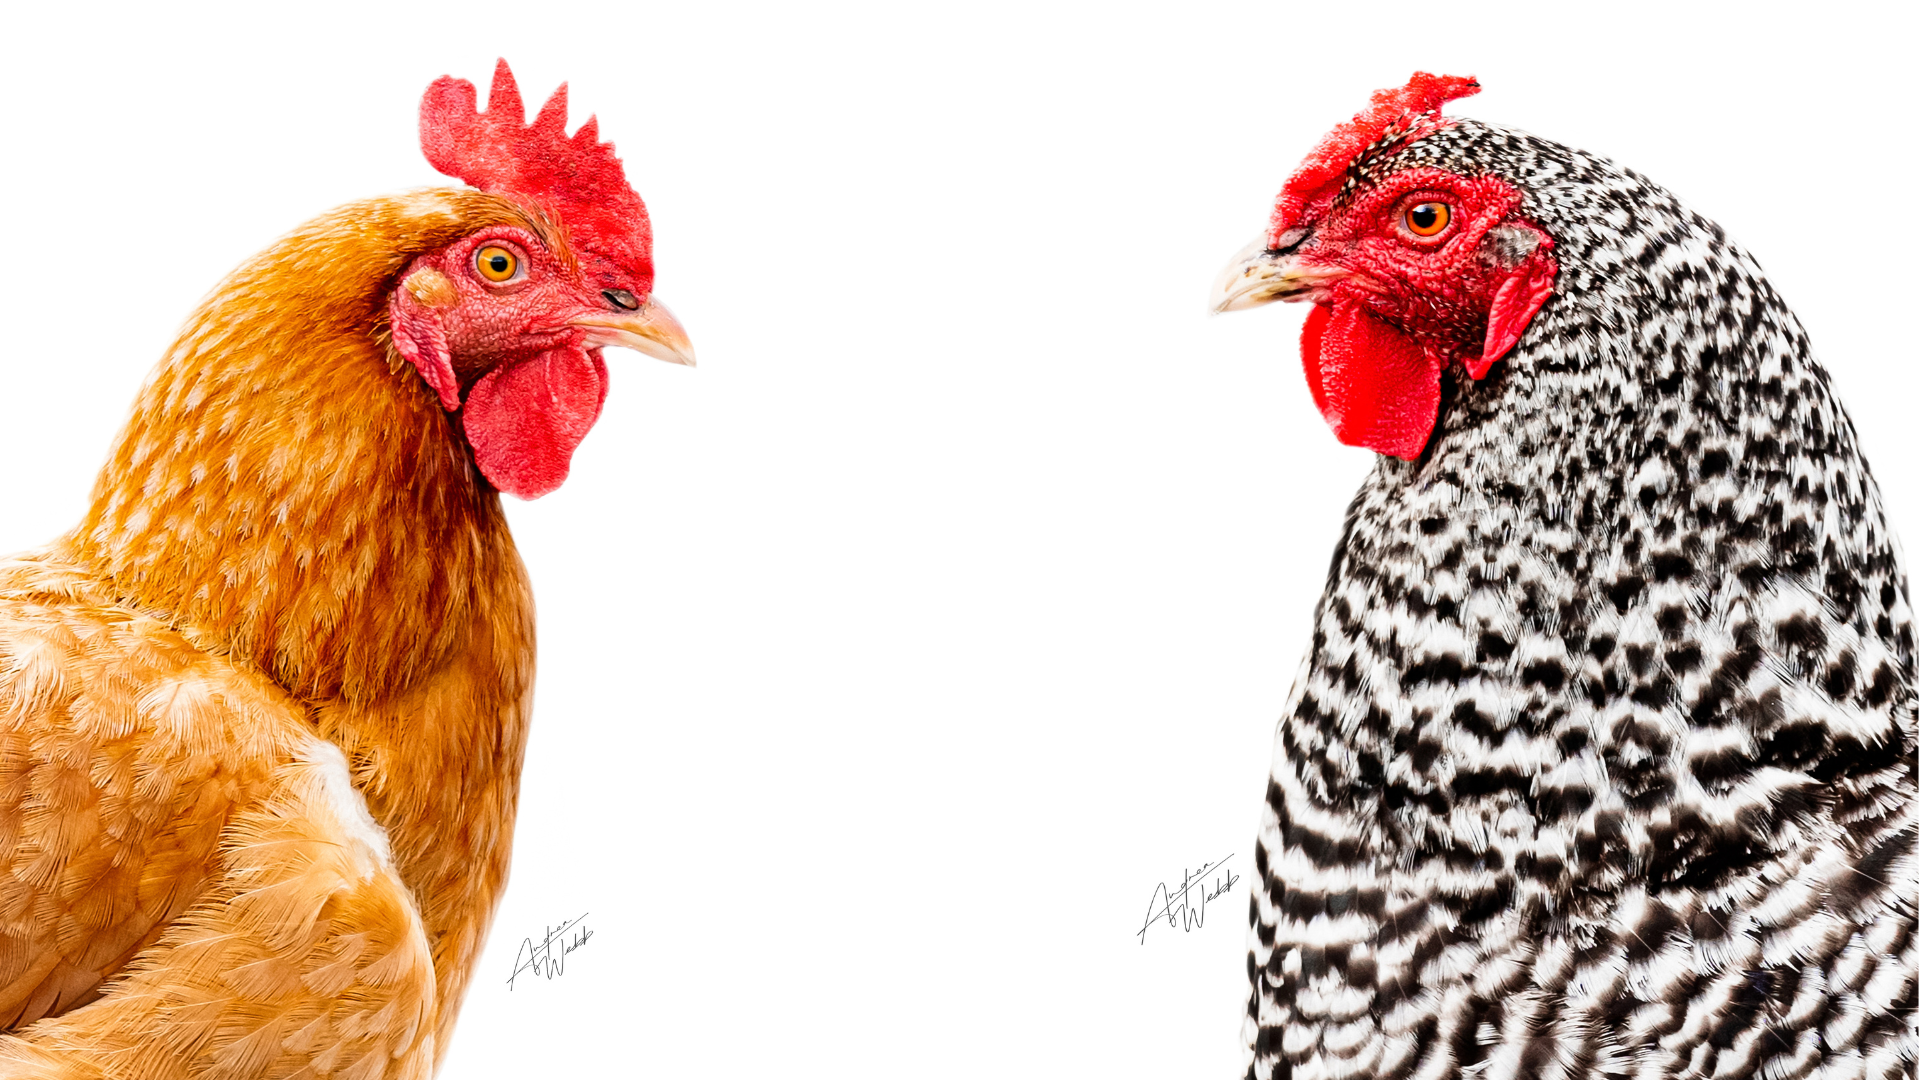 Chicken and Animal Photography in Georgia and South Carolina